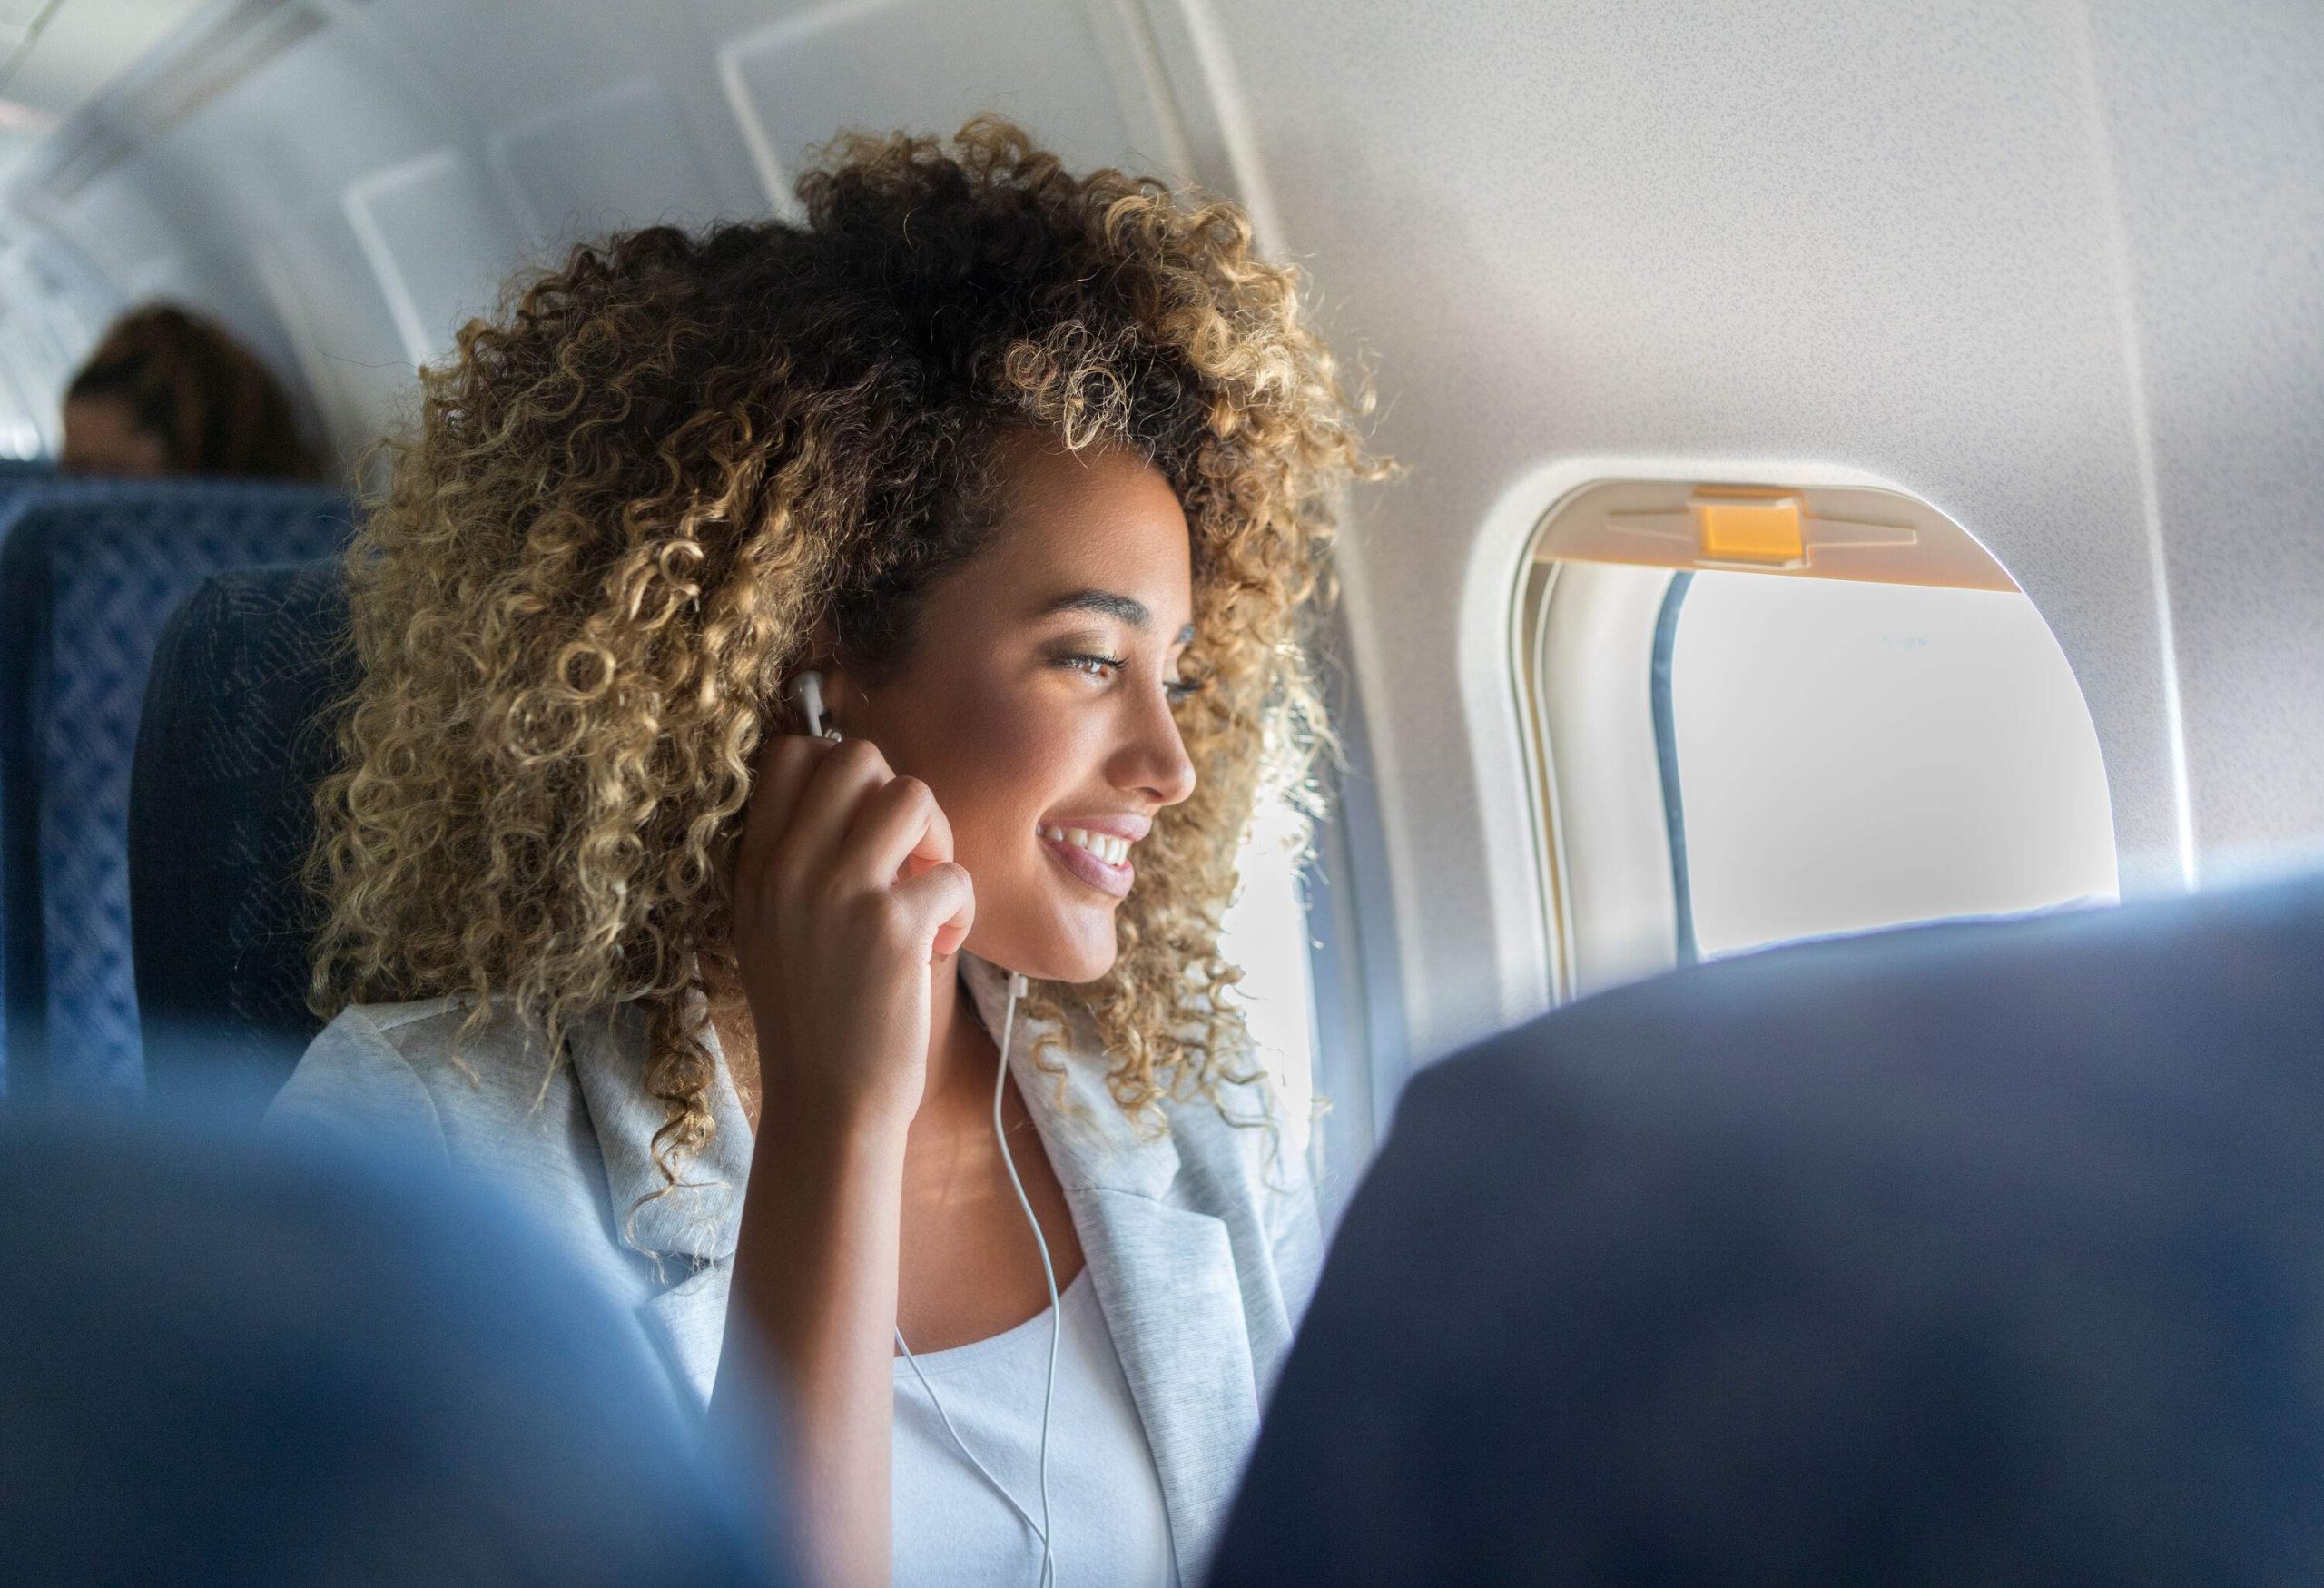 A woman with curly hair puts on her earbuds as she settles into her window seat on an airplane.